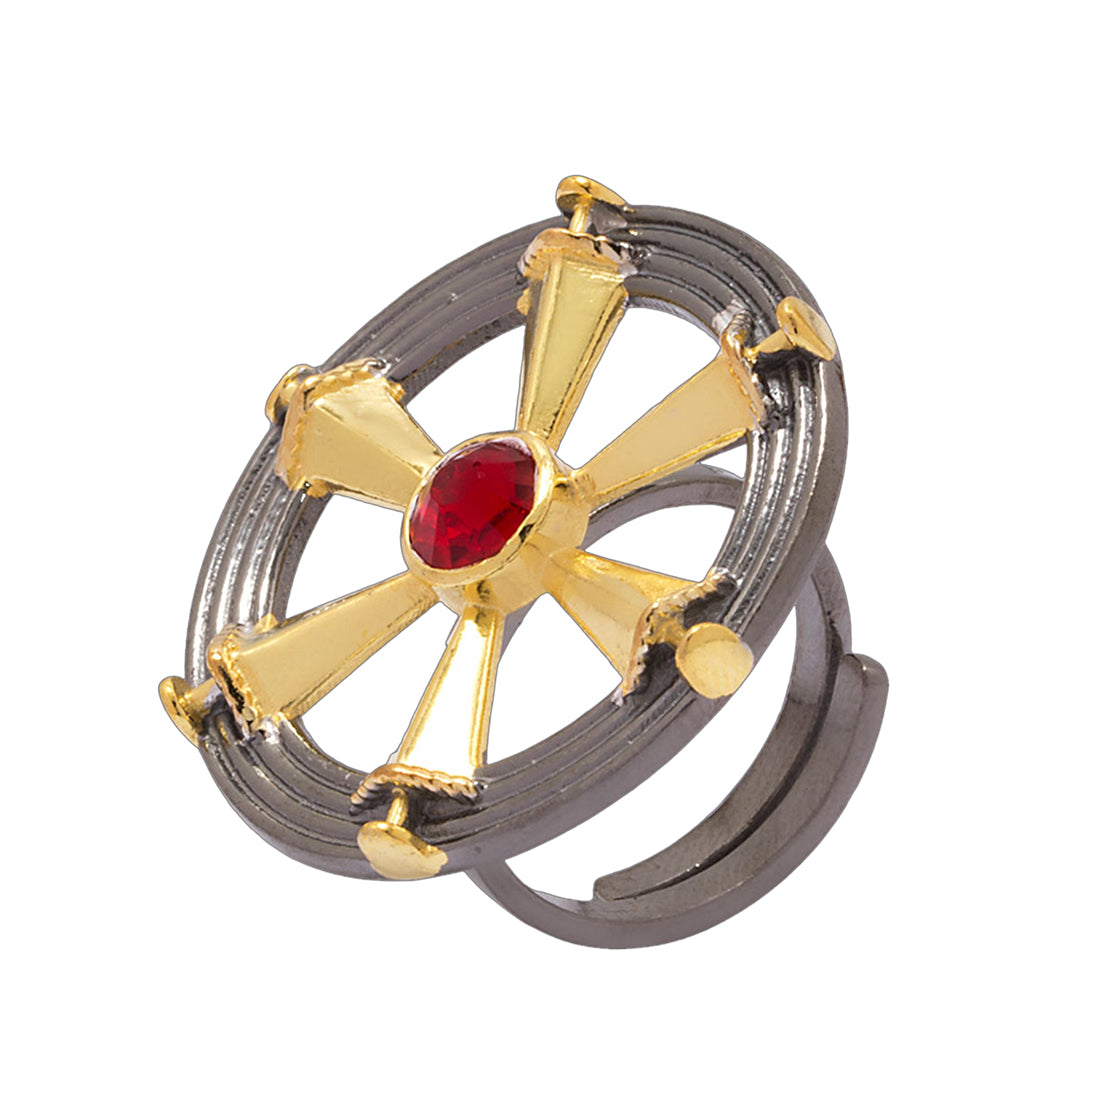 Modern Statement Ring Adorned with Red Stone